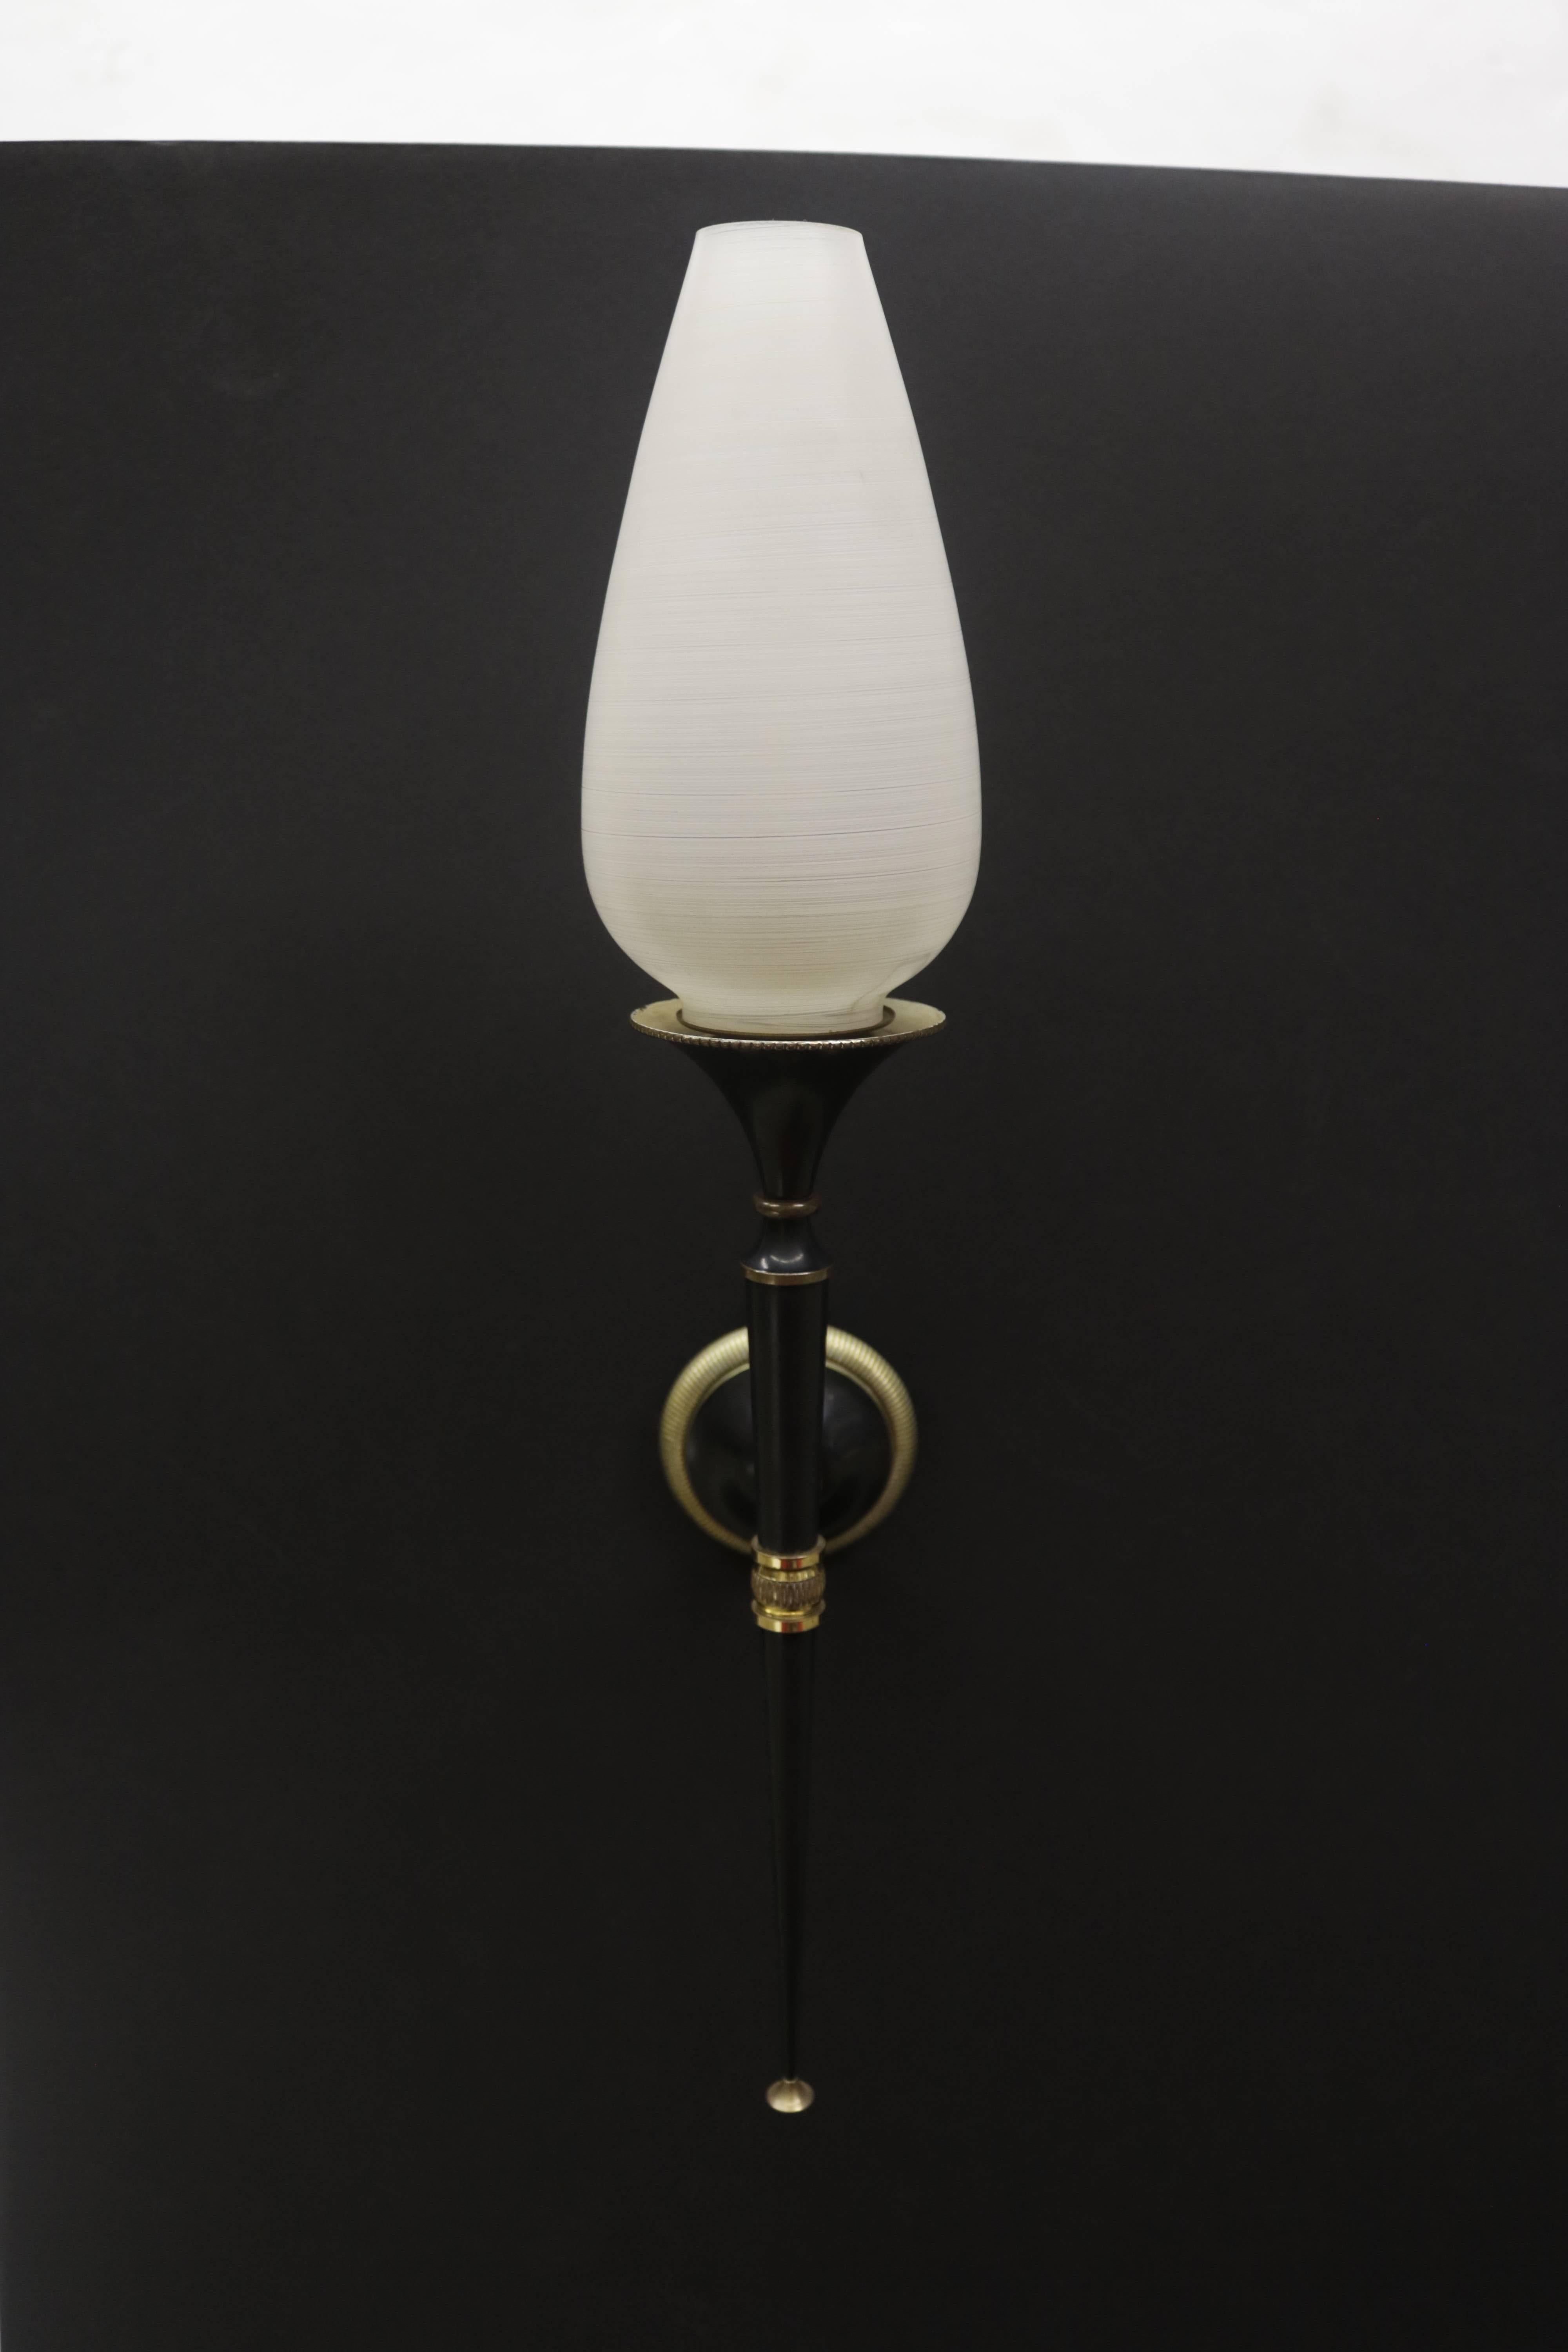 Single 1950s French sconce black metal and brass with a streaked frosted glass tulip shape shade.